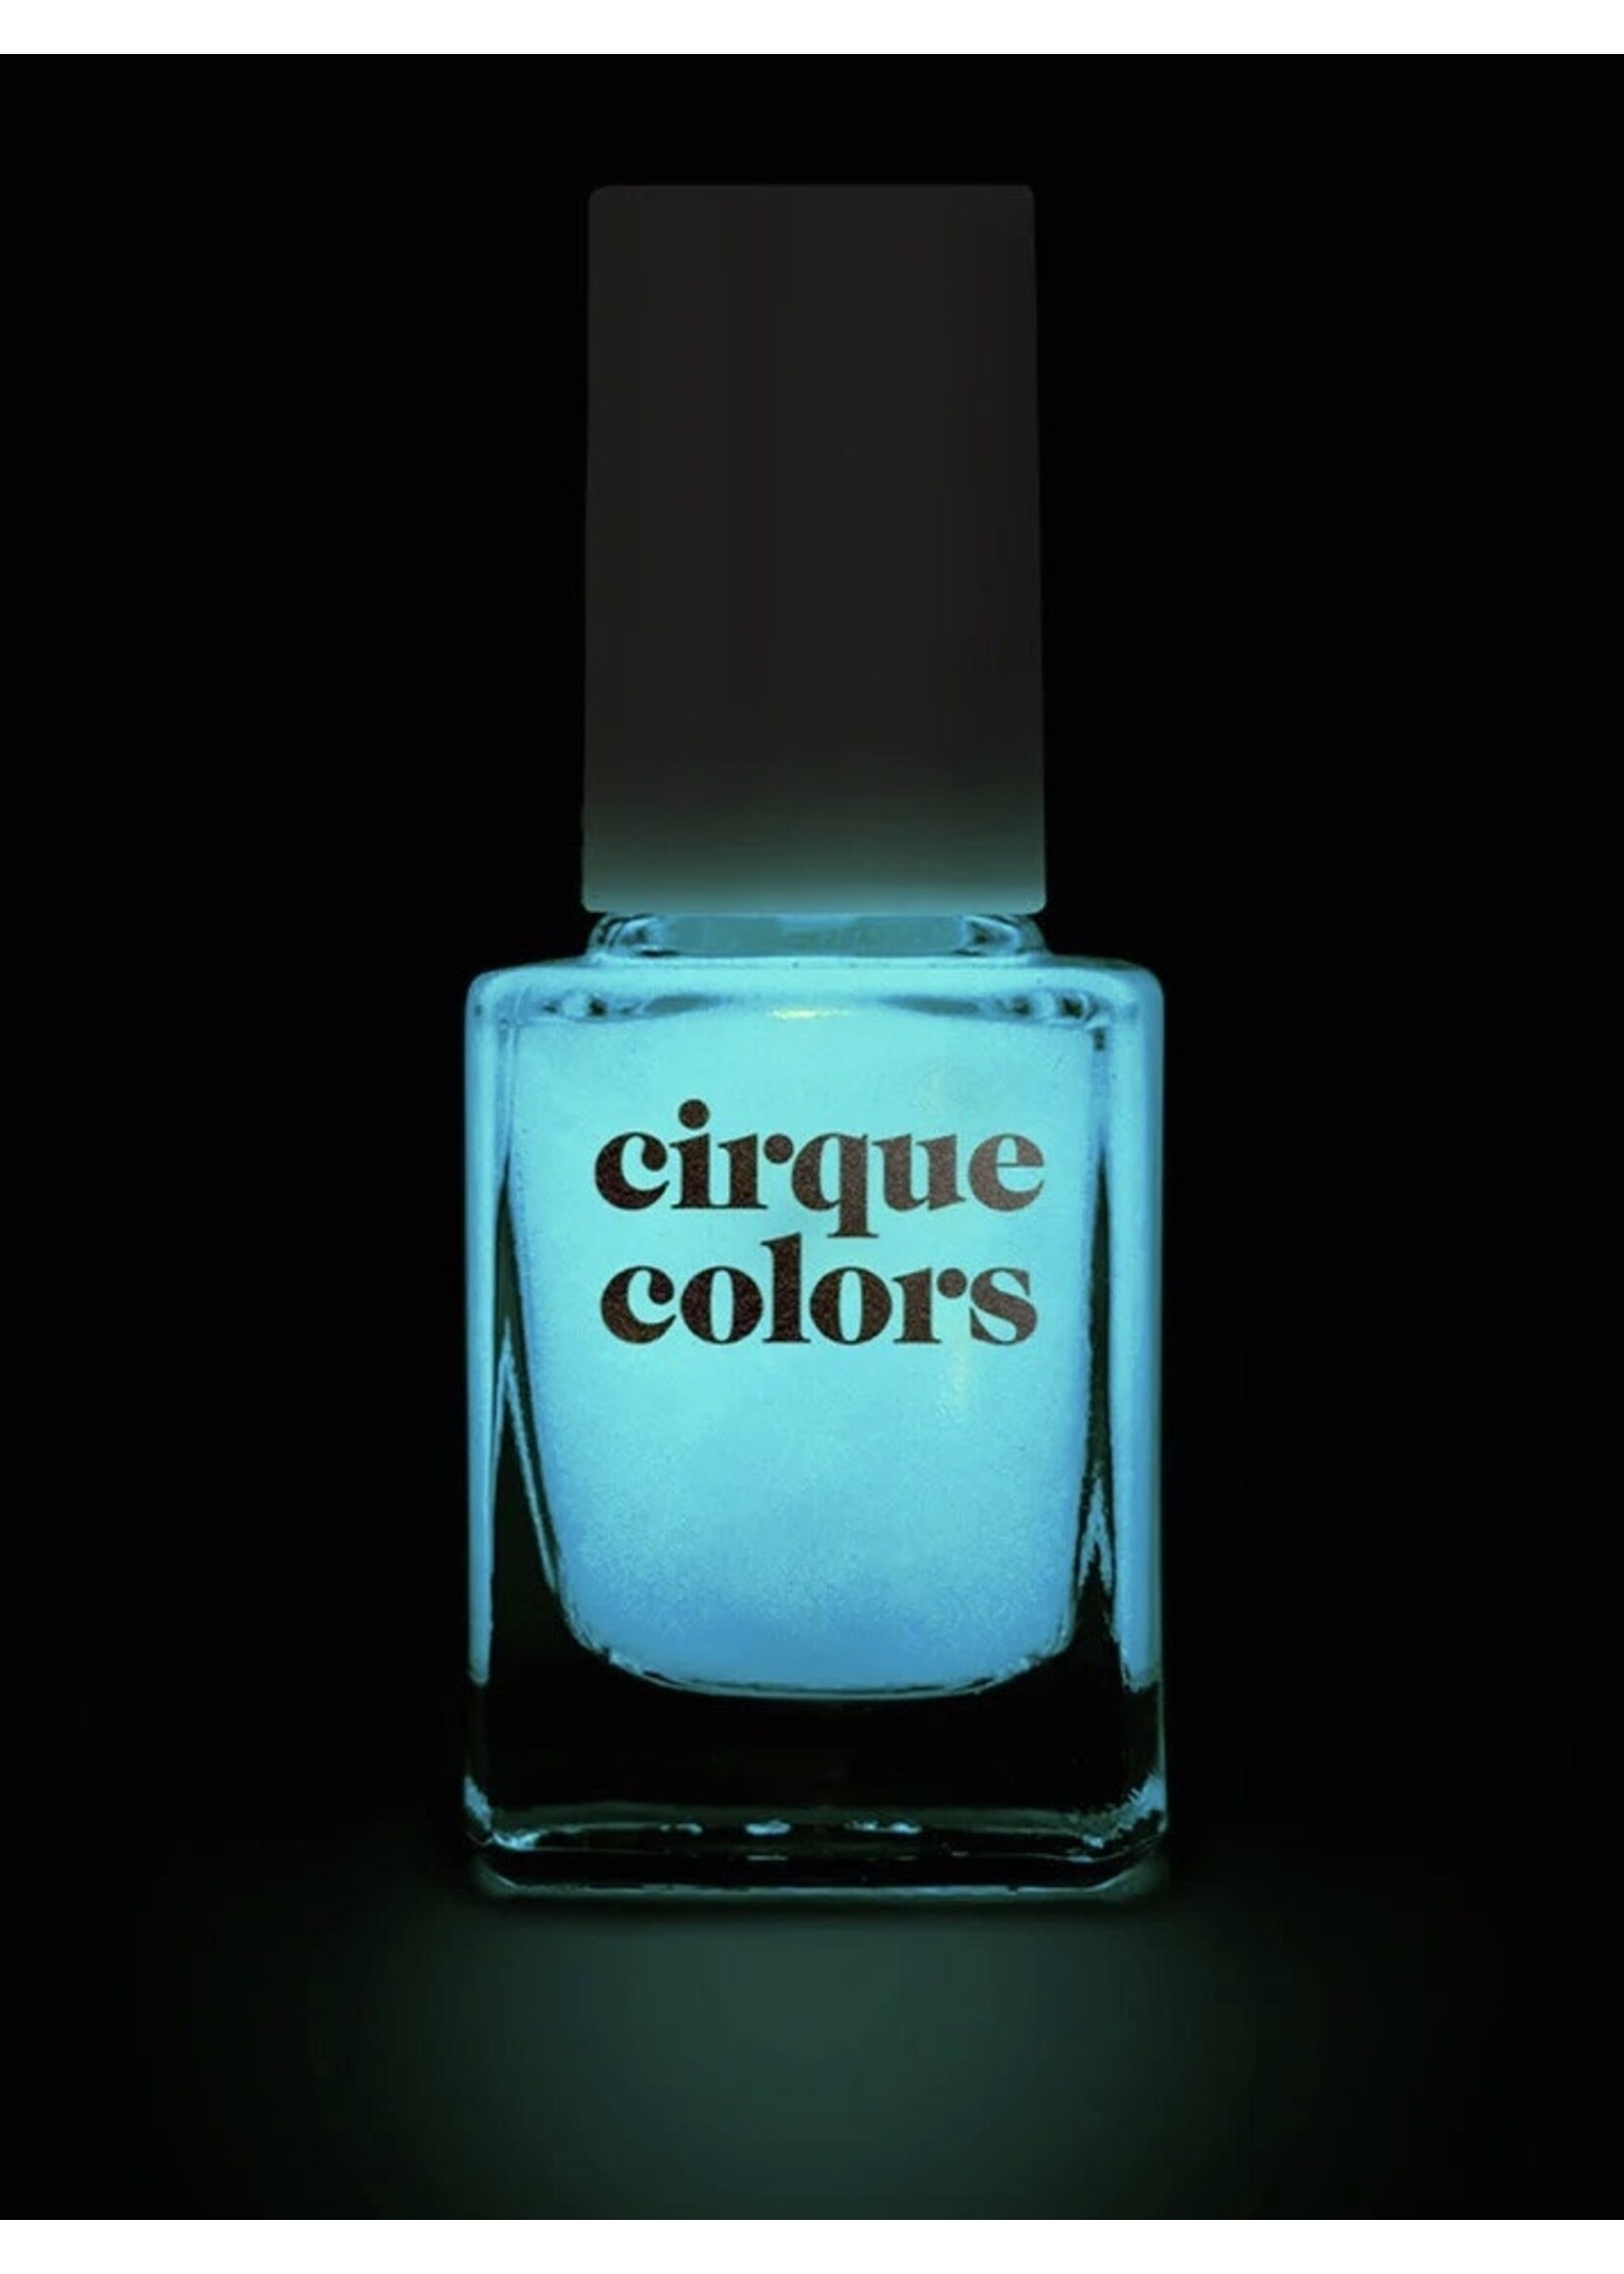 Cirque Colors Nail polishes "Scream Kween" by Cirque Colors